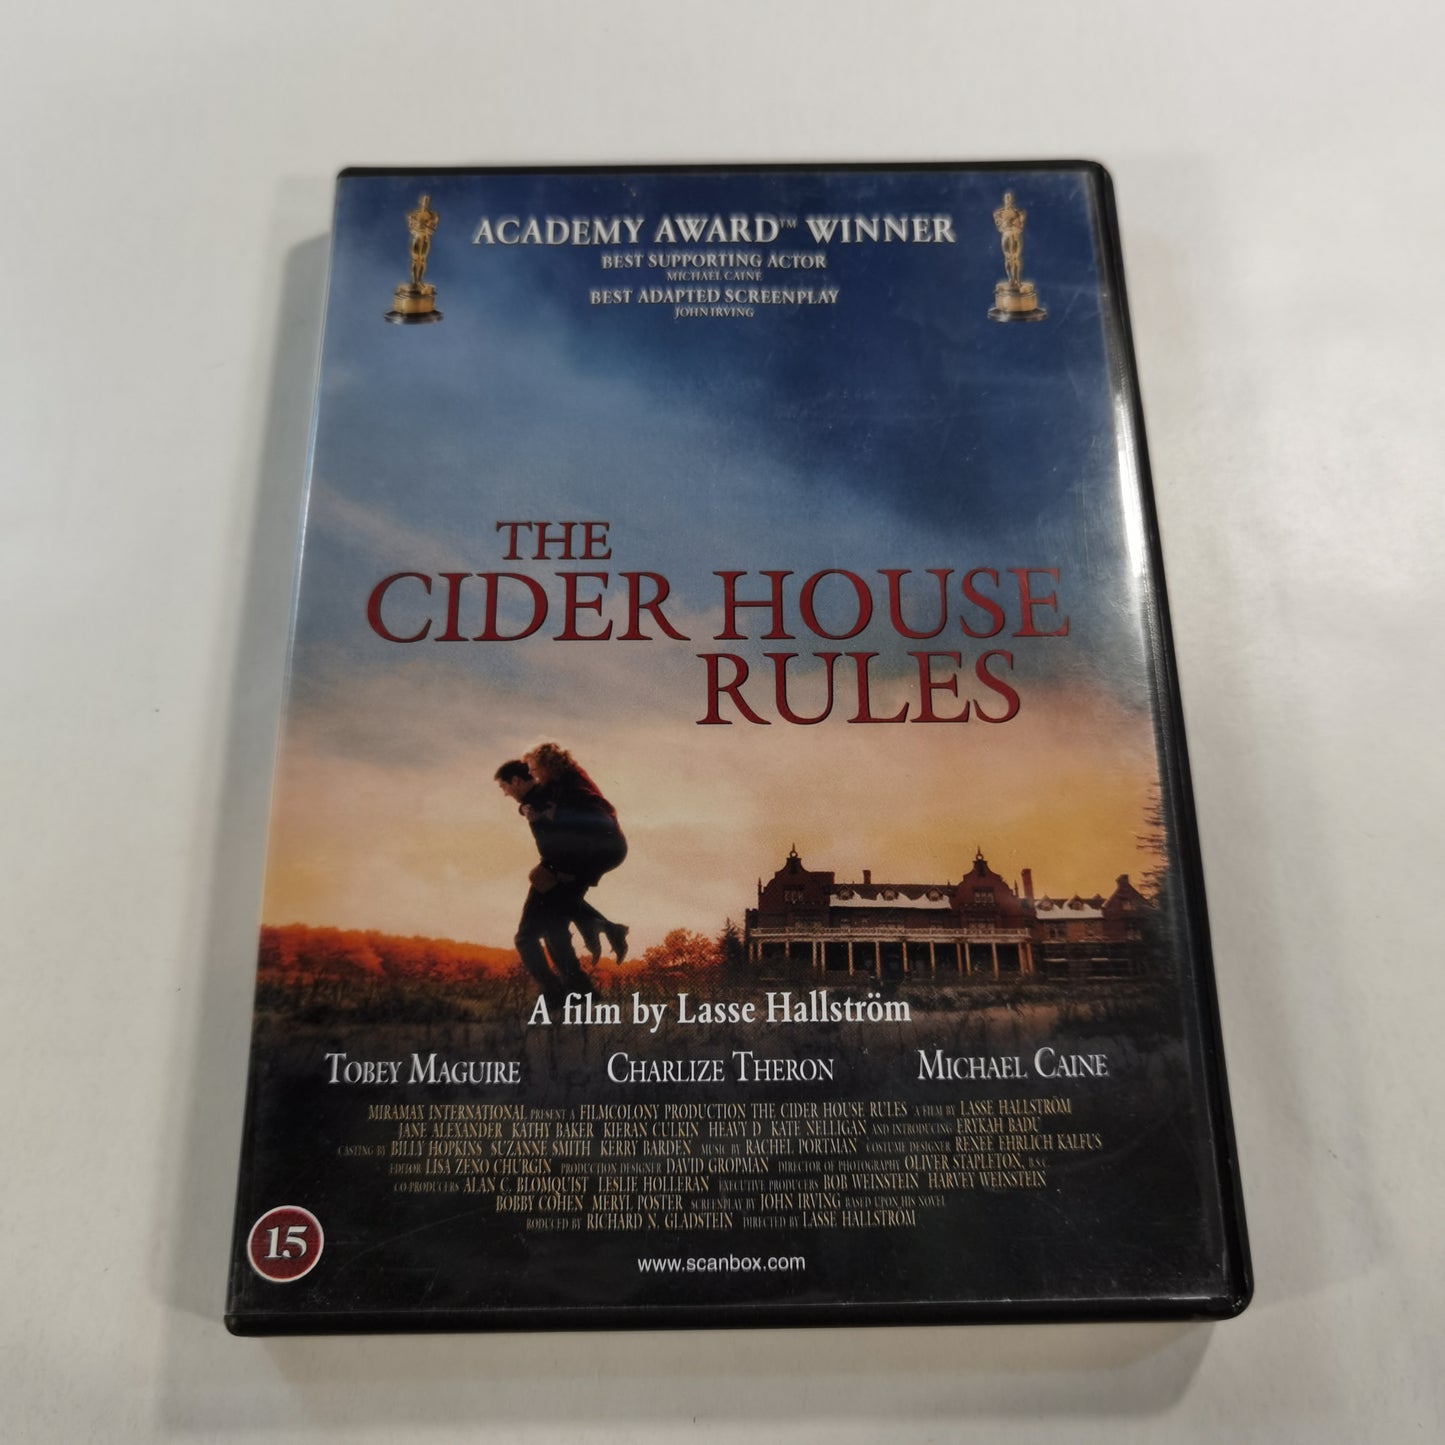 The Cider House Rules (1999) - DVD DK NO SE FI Global Video